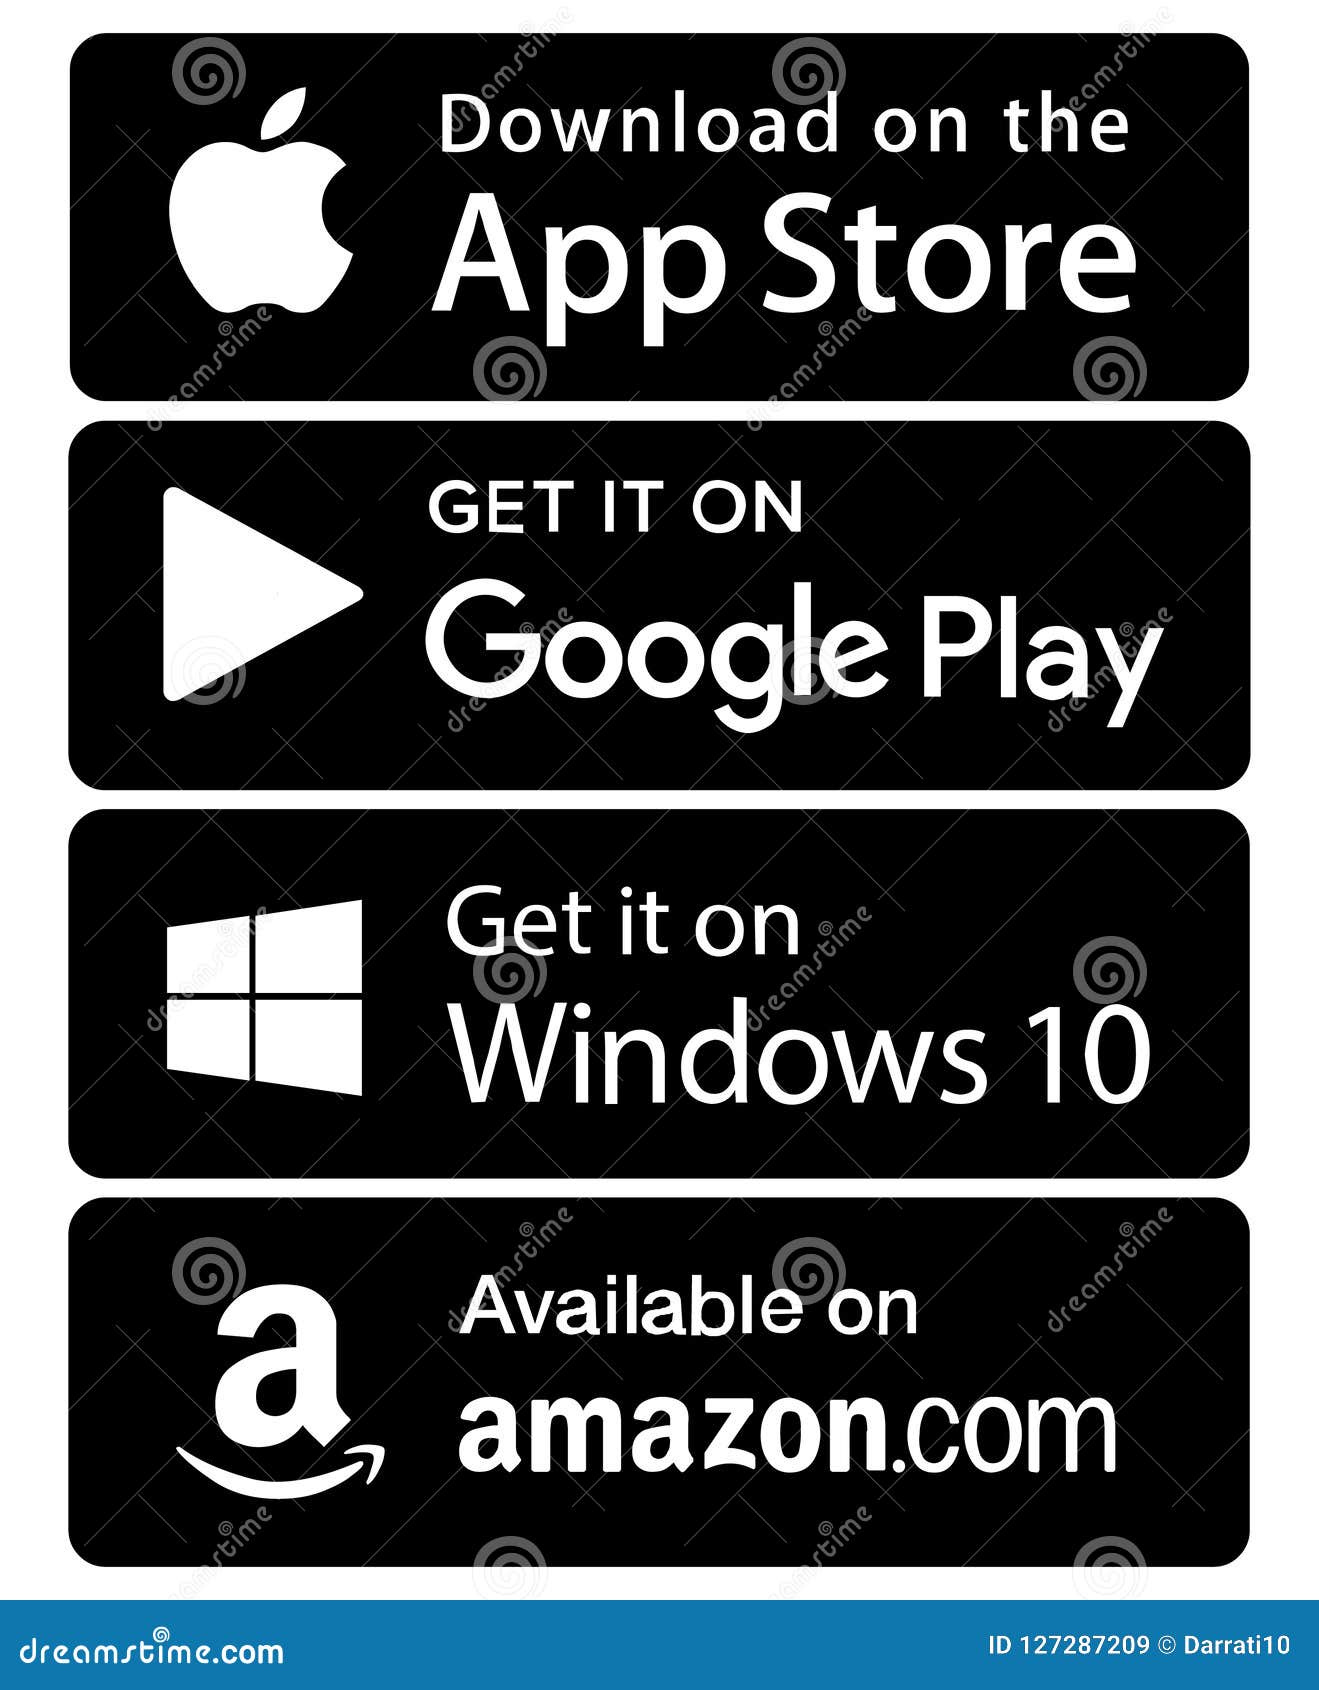 google play store download windows 11